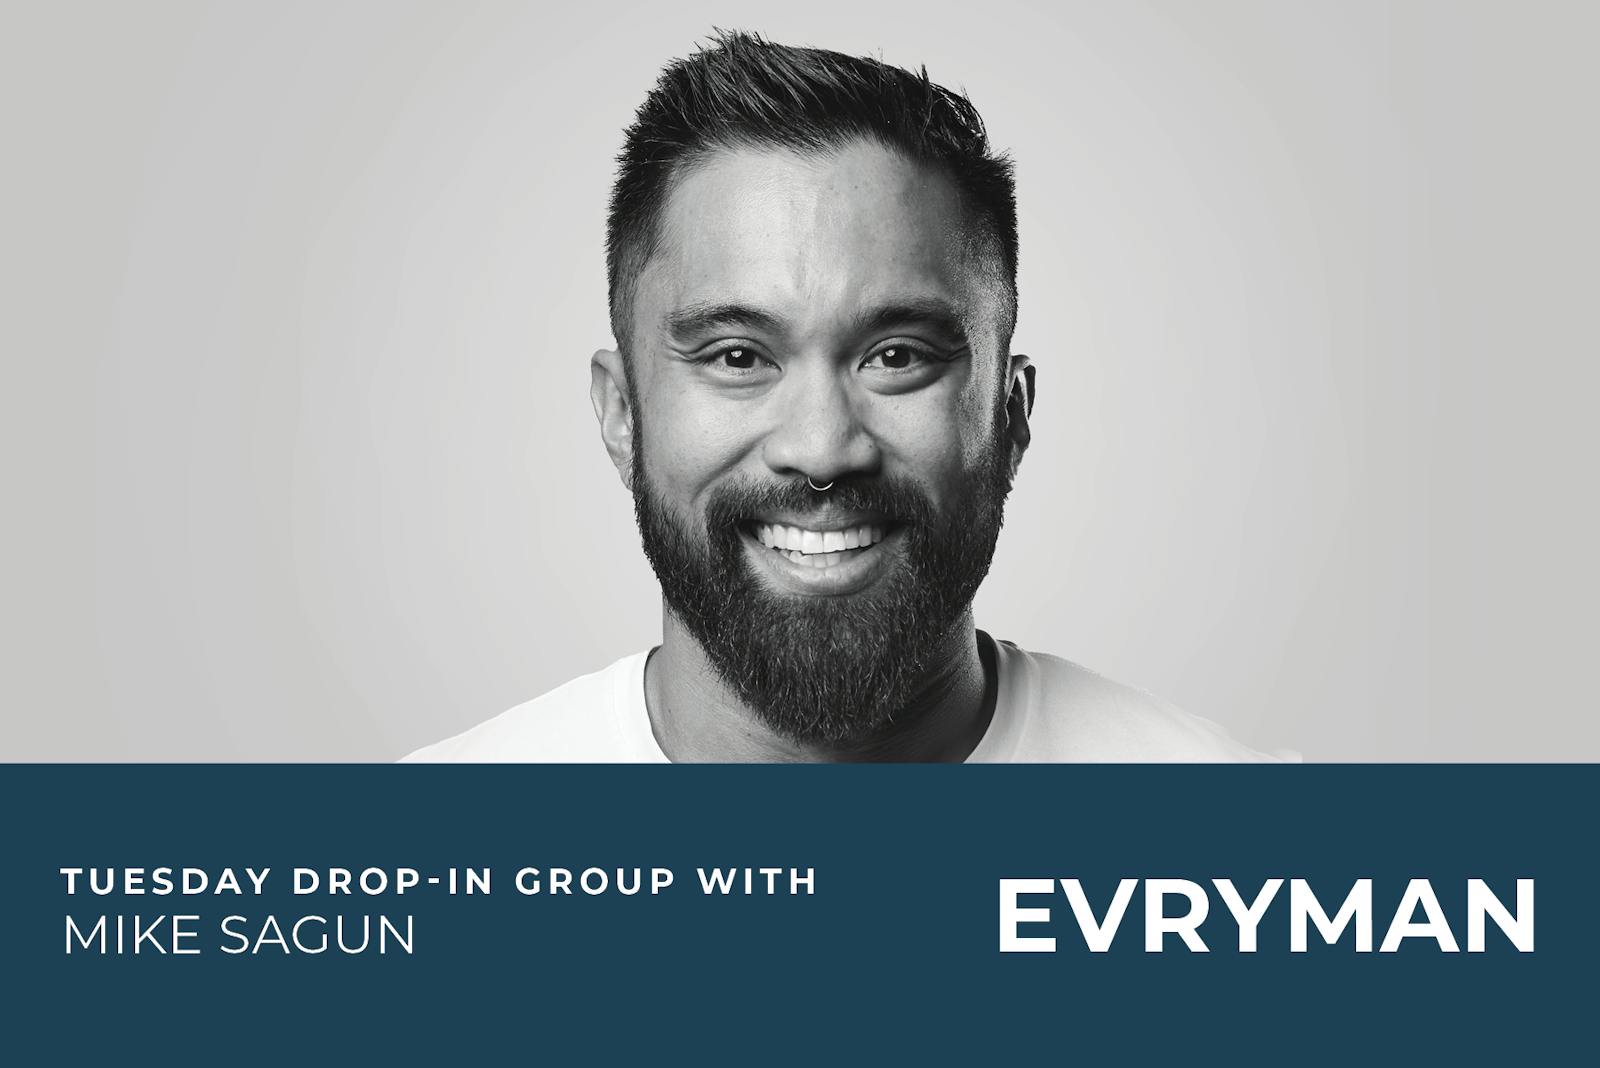 EVRYMAN Tuesday Drop-In Group